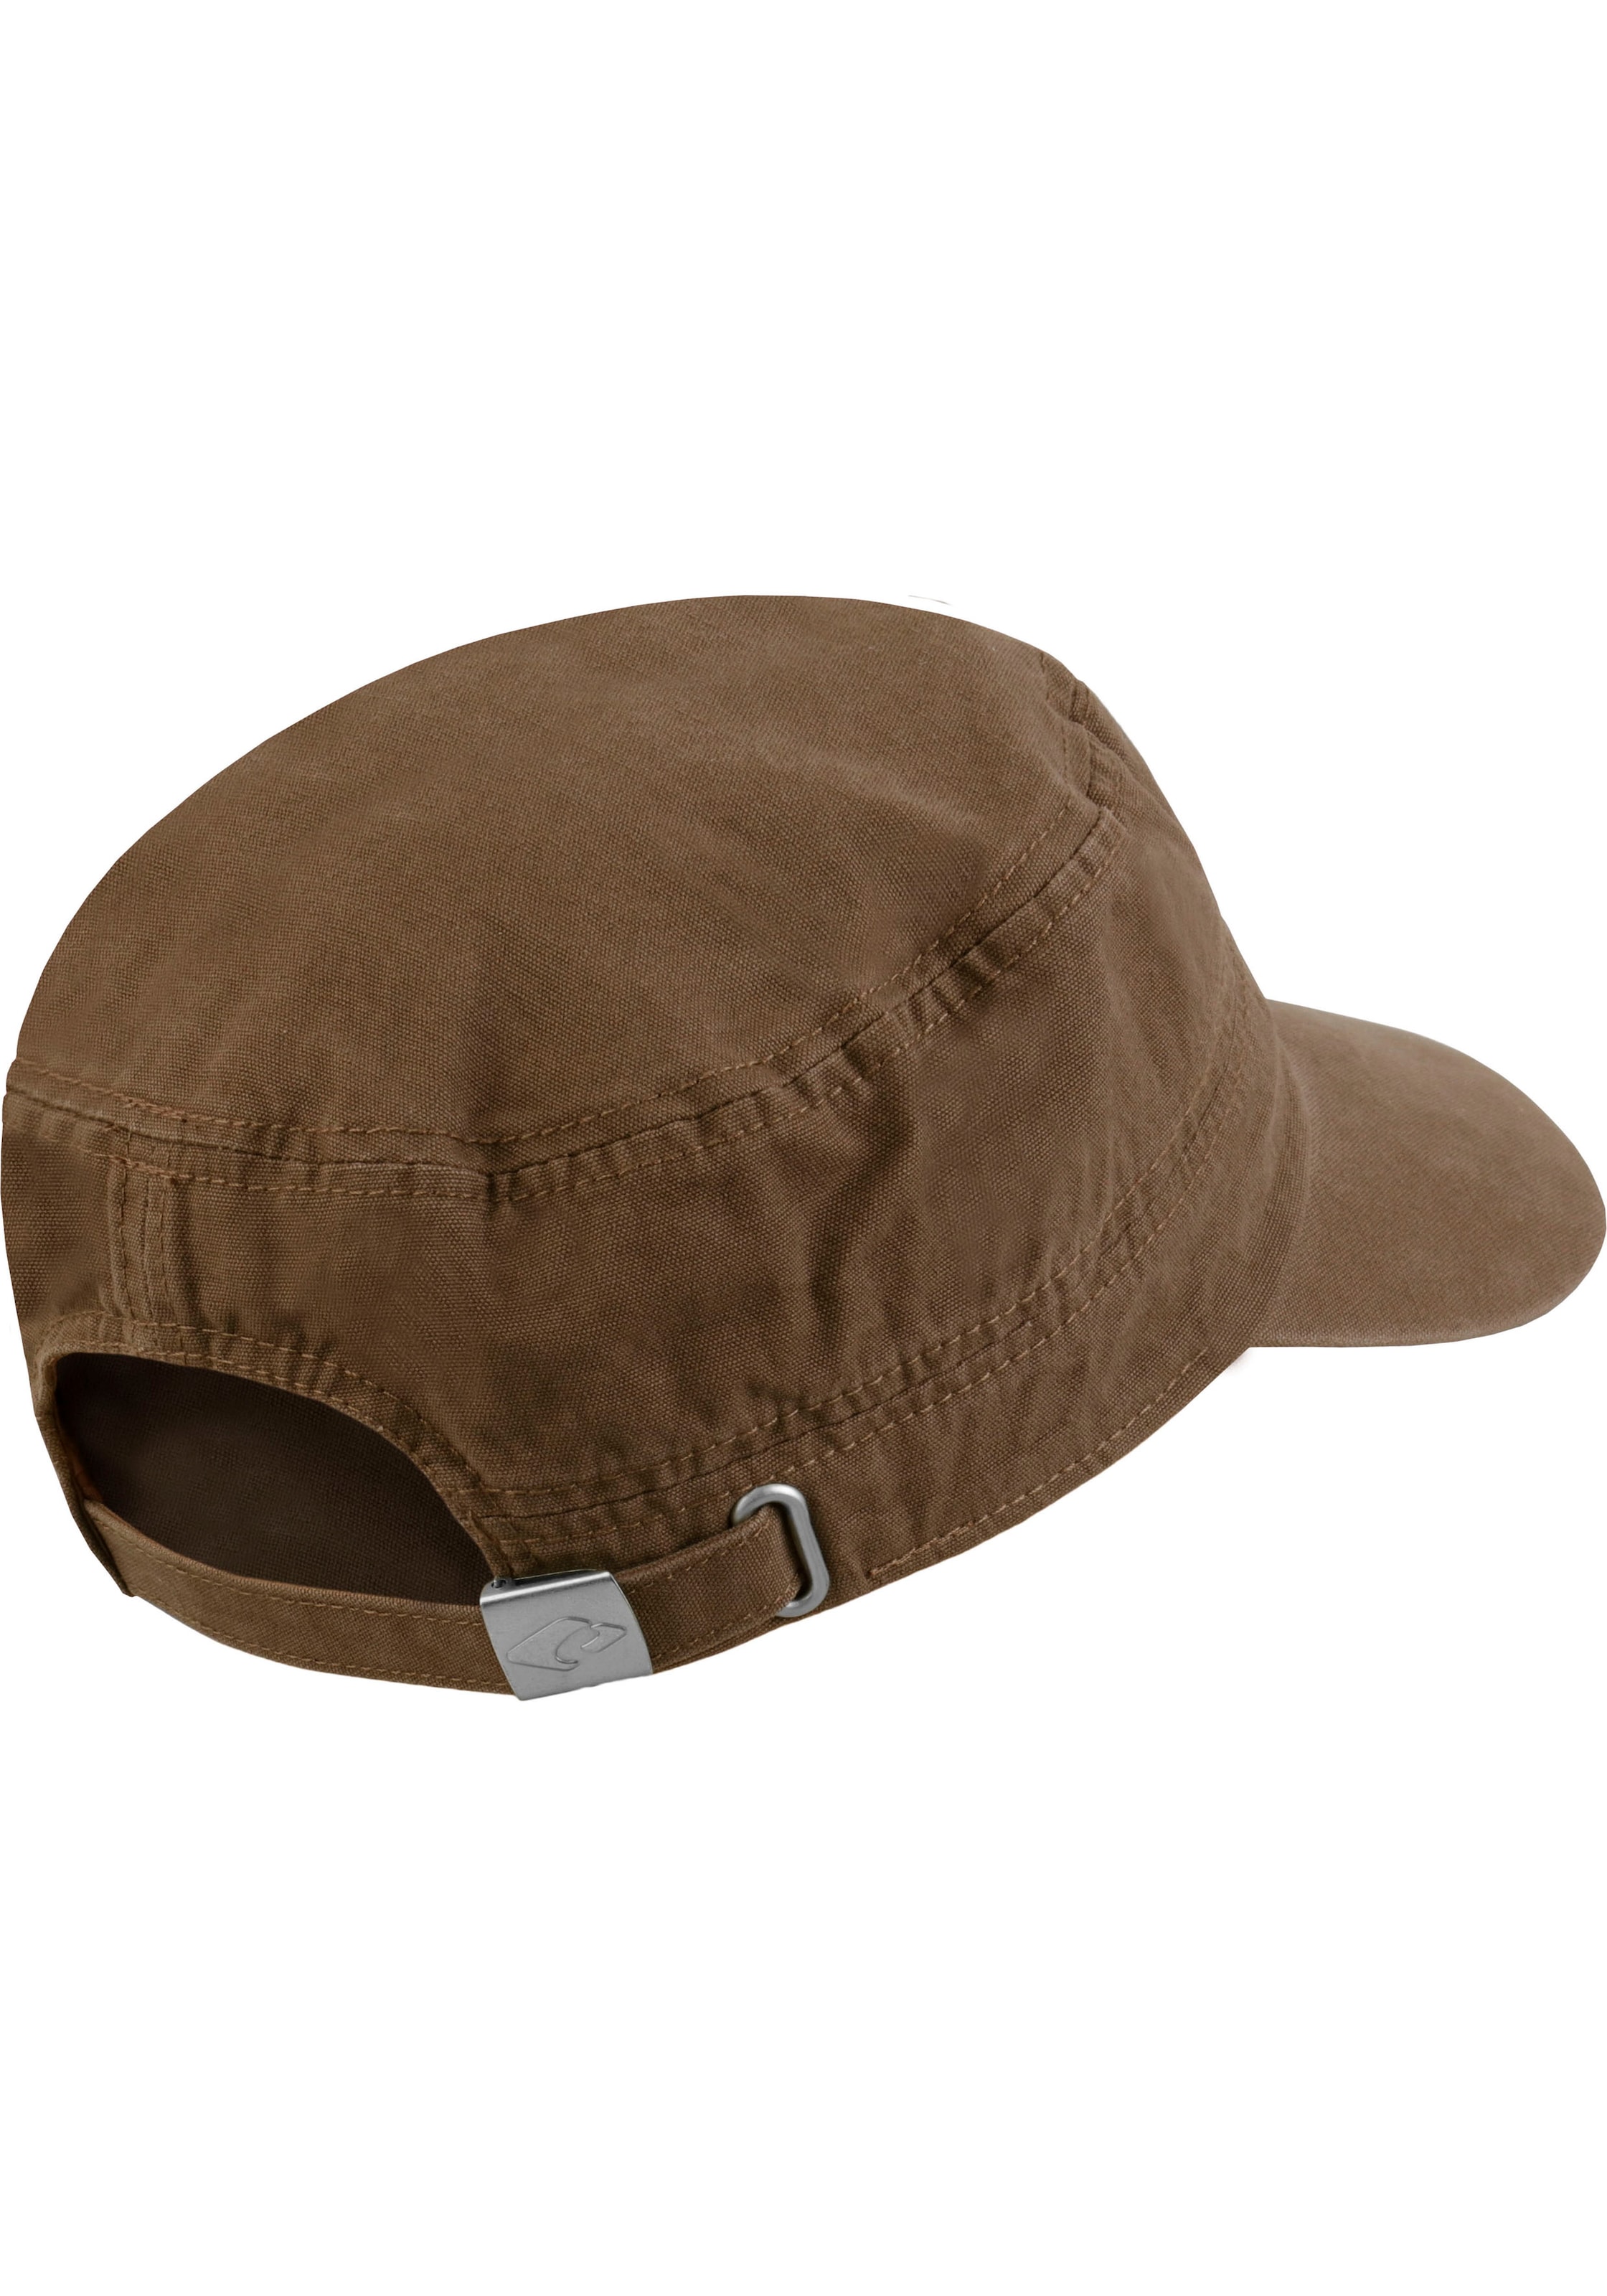 chillouts »Dublin Hat« Army Cap bei